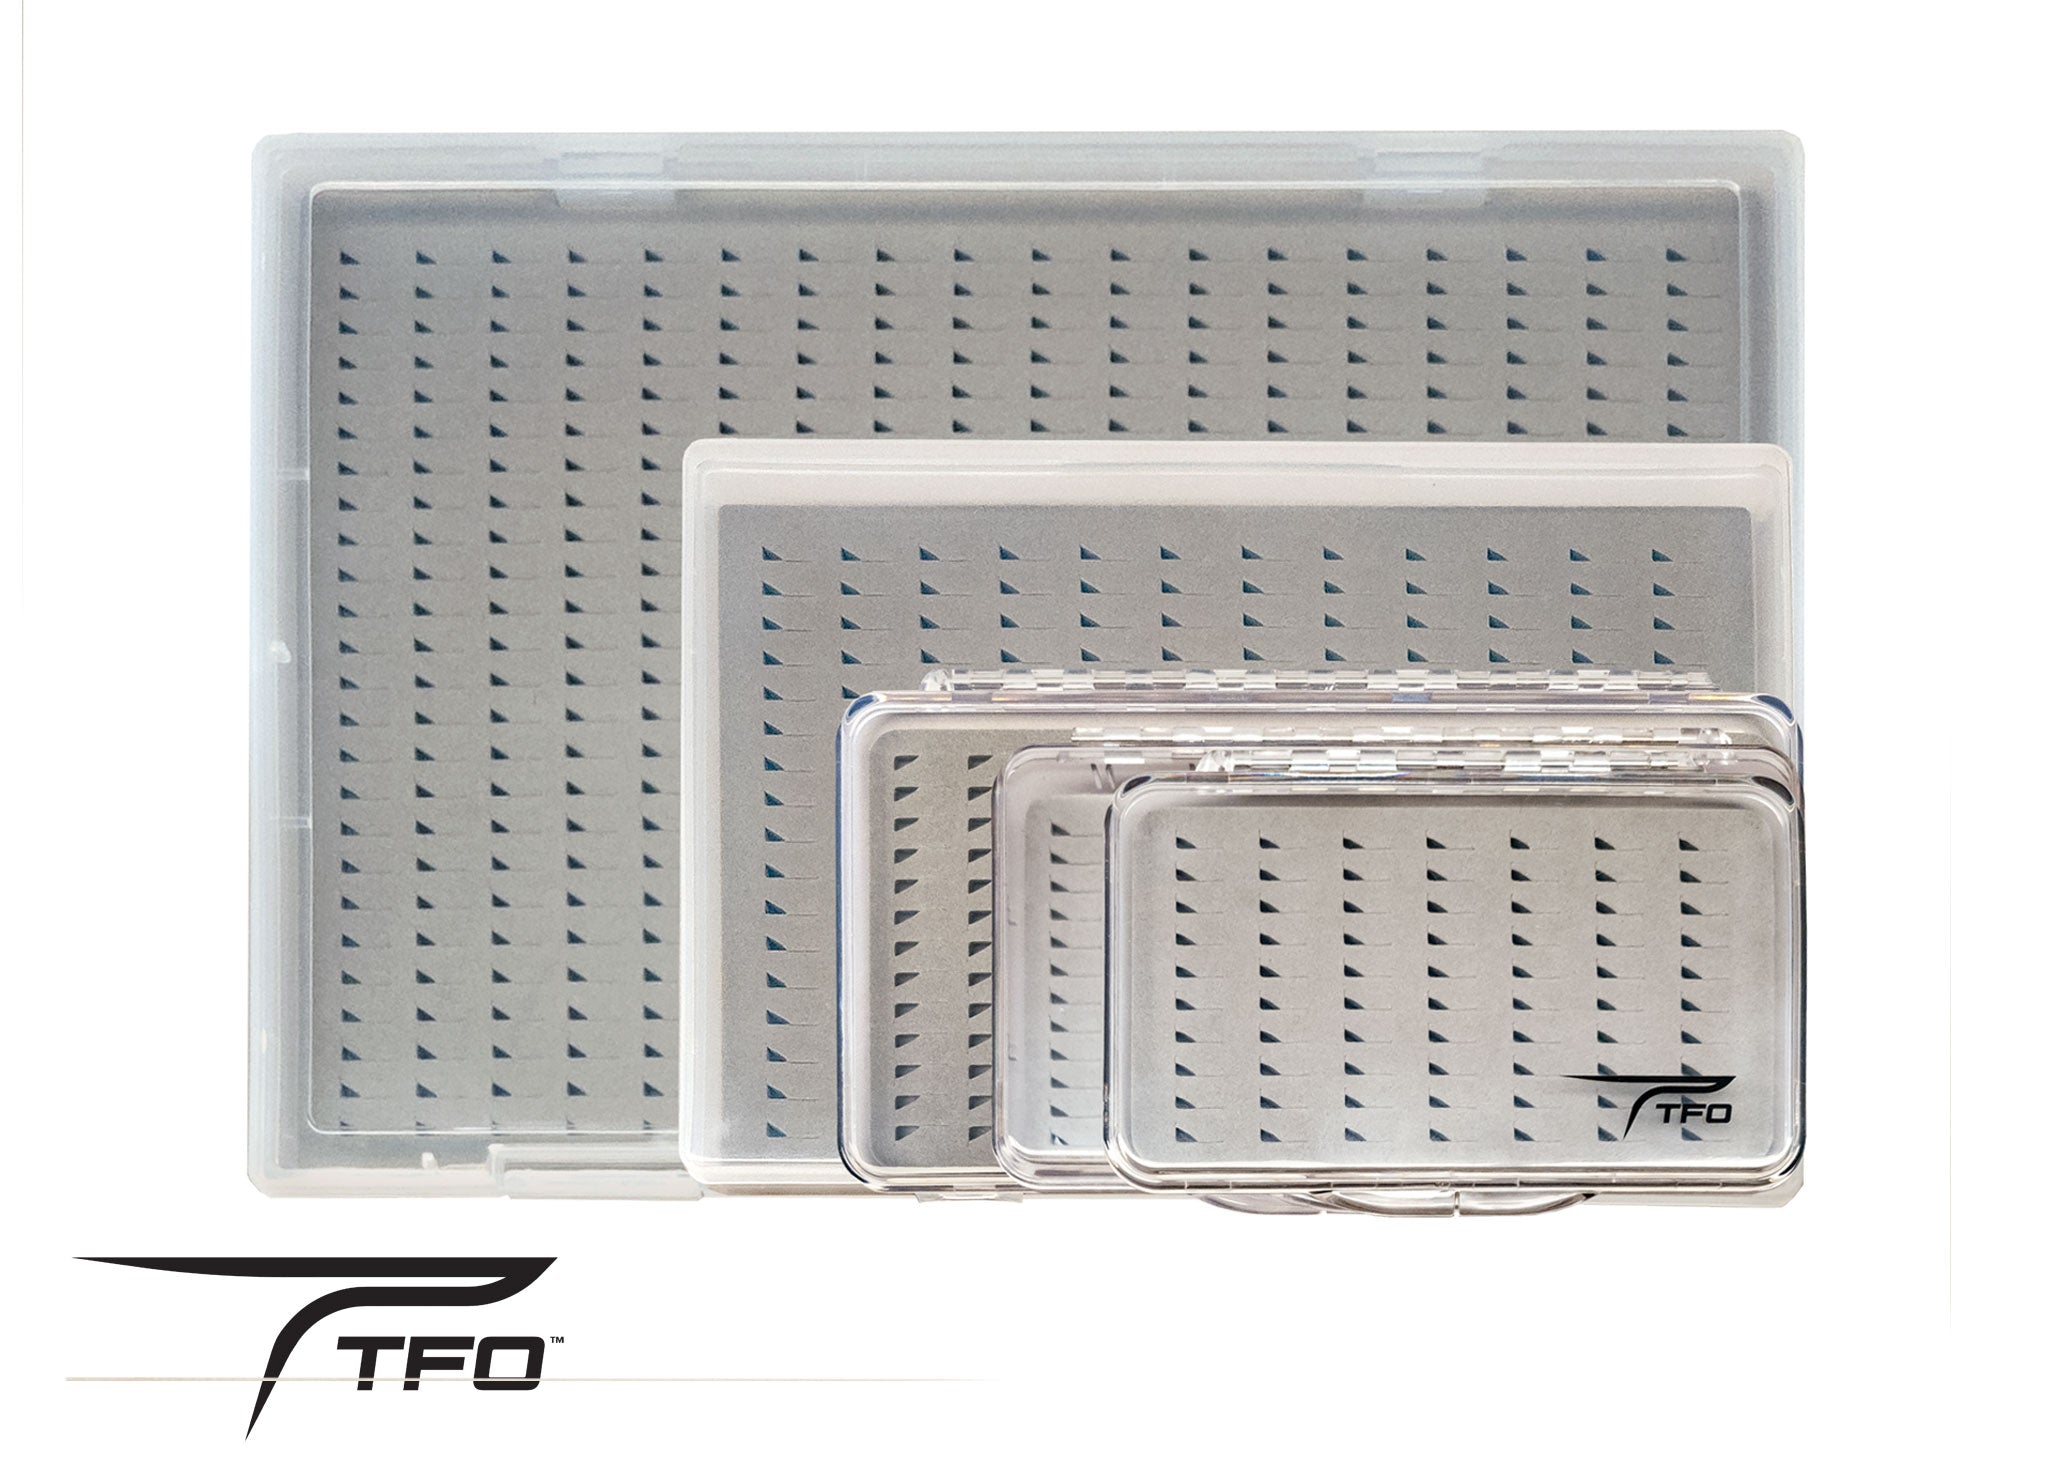 TFO Clear Fly Box With Slit Foam-XL Holds 450 Flies, Fly Boxes